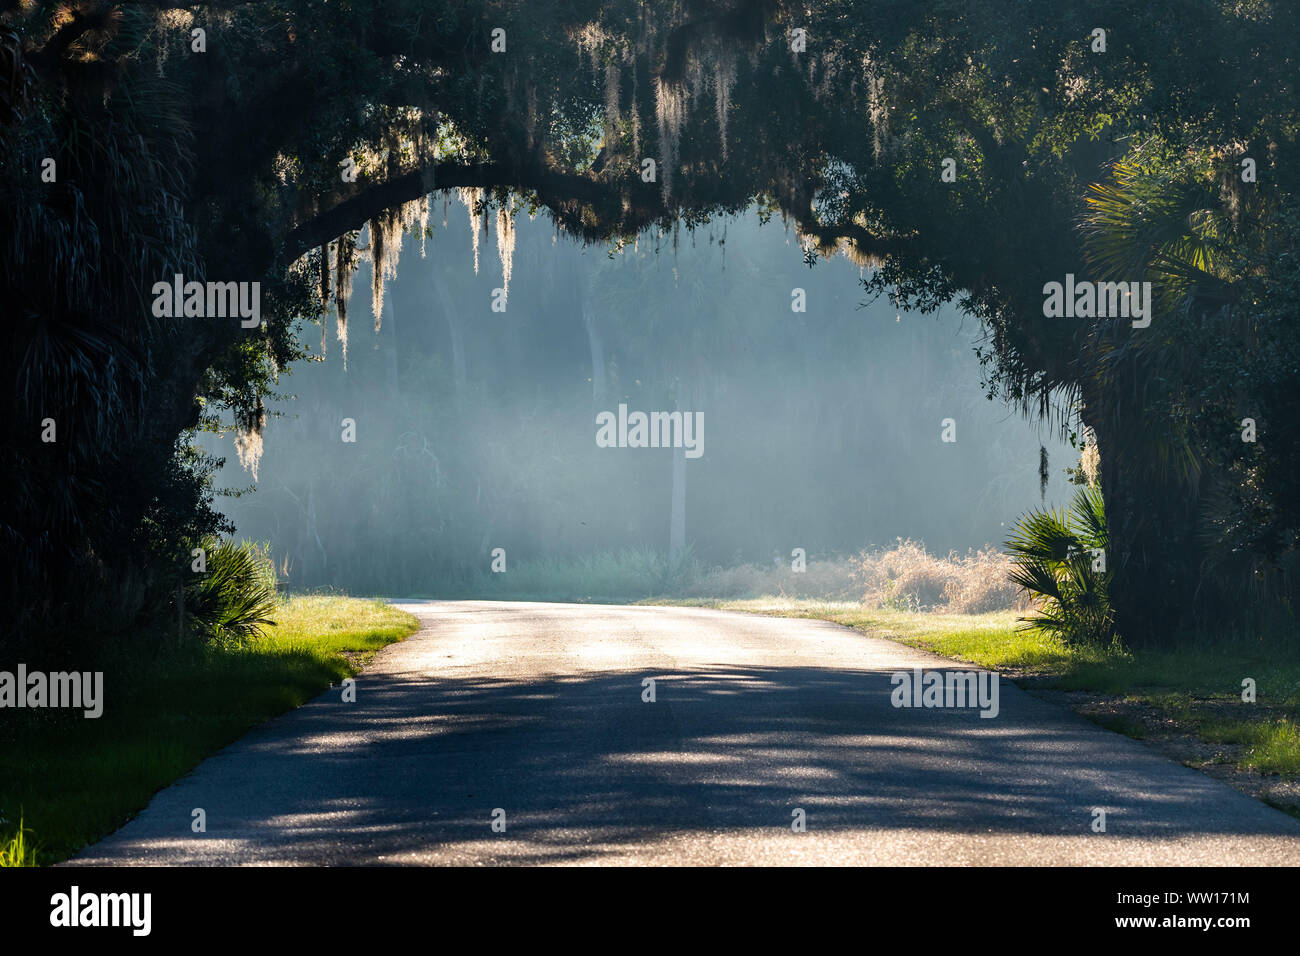 Tunnel of trees at a park in central Florida Stock Photo